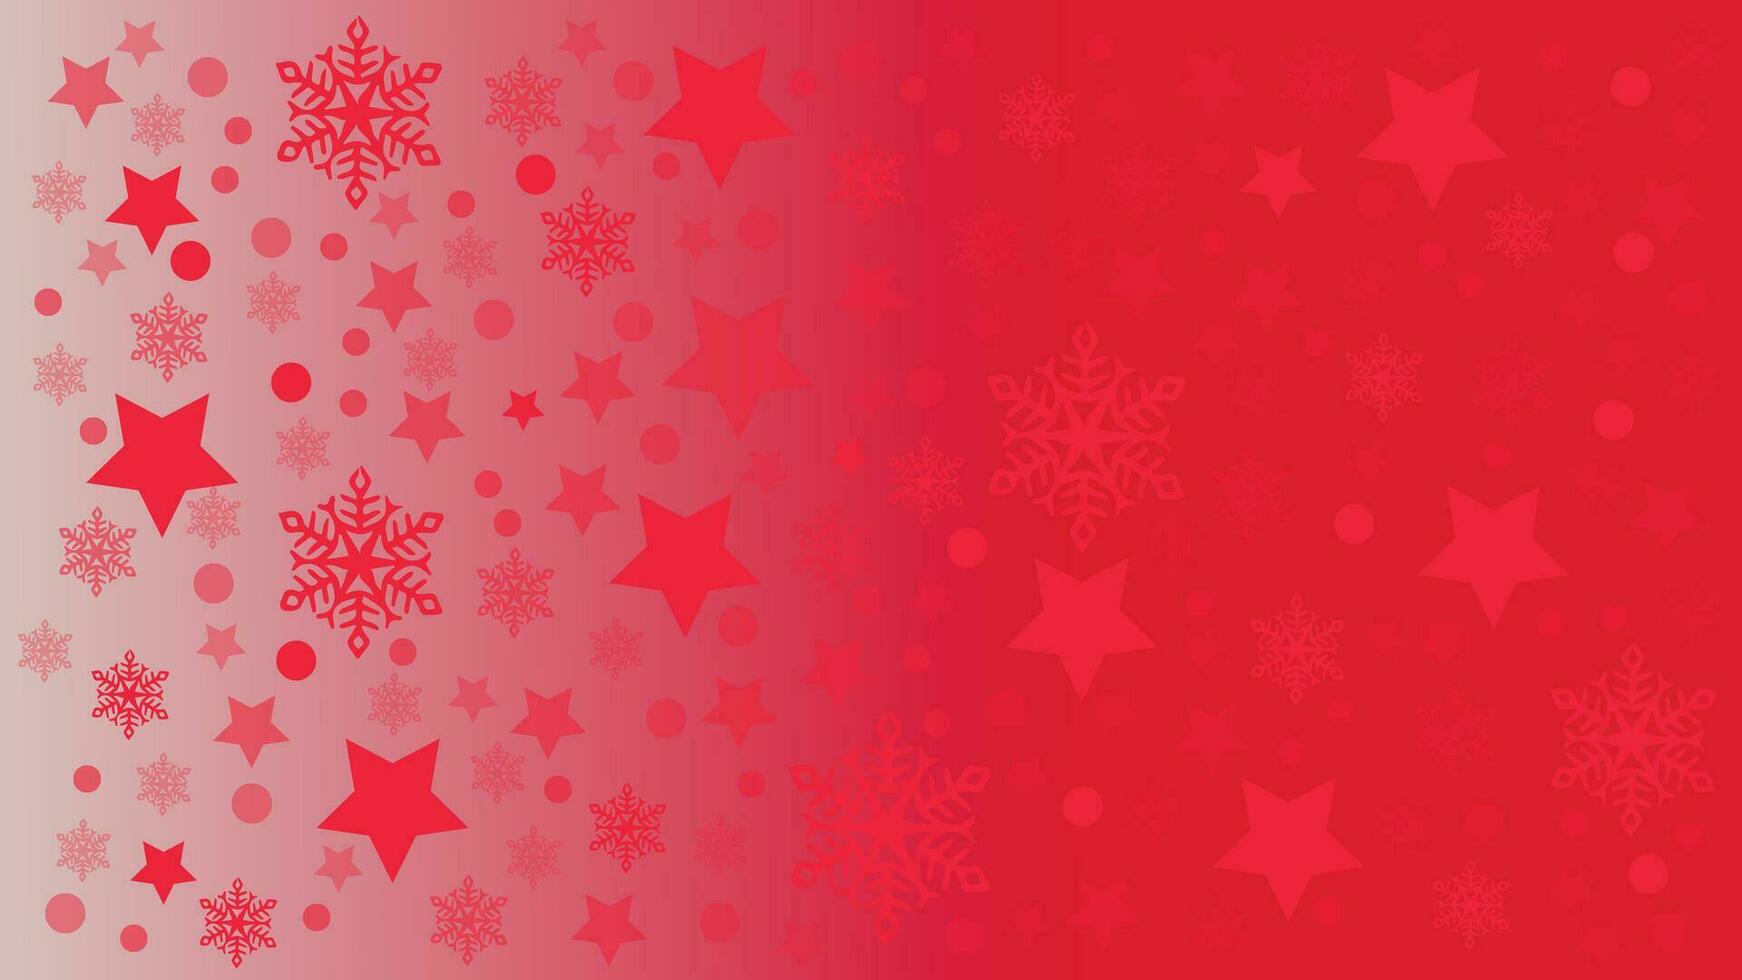 Abstract Christmas background in red and white color combination. You can use this kind of background in your party invitation project. vector